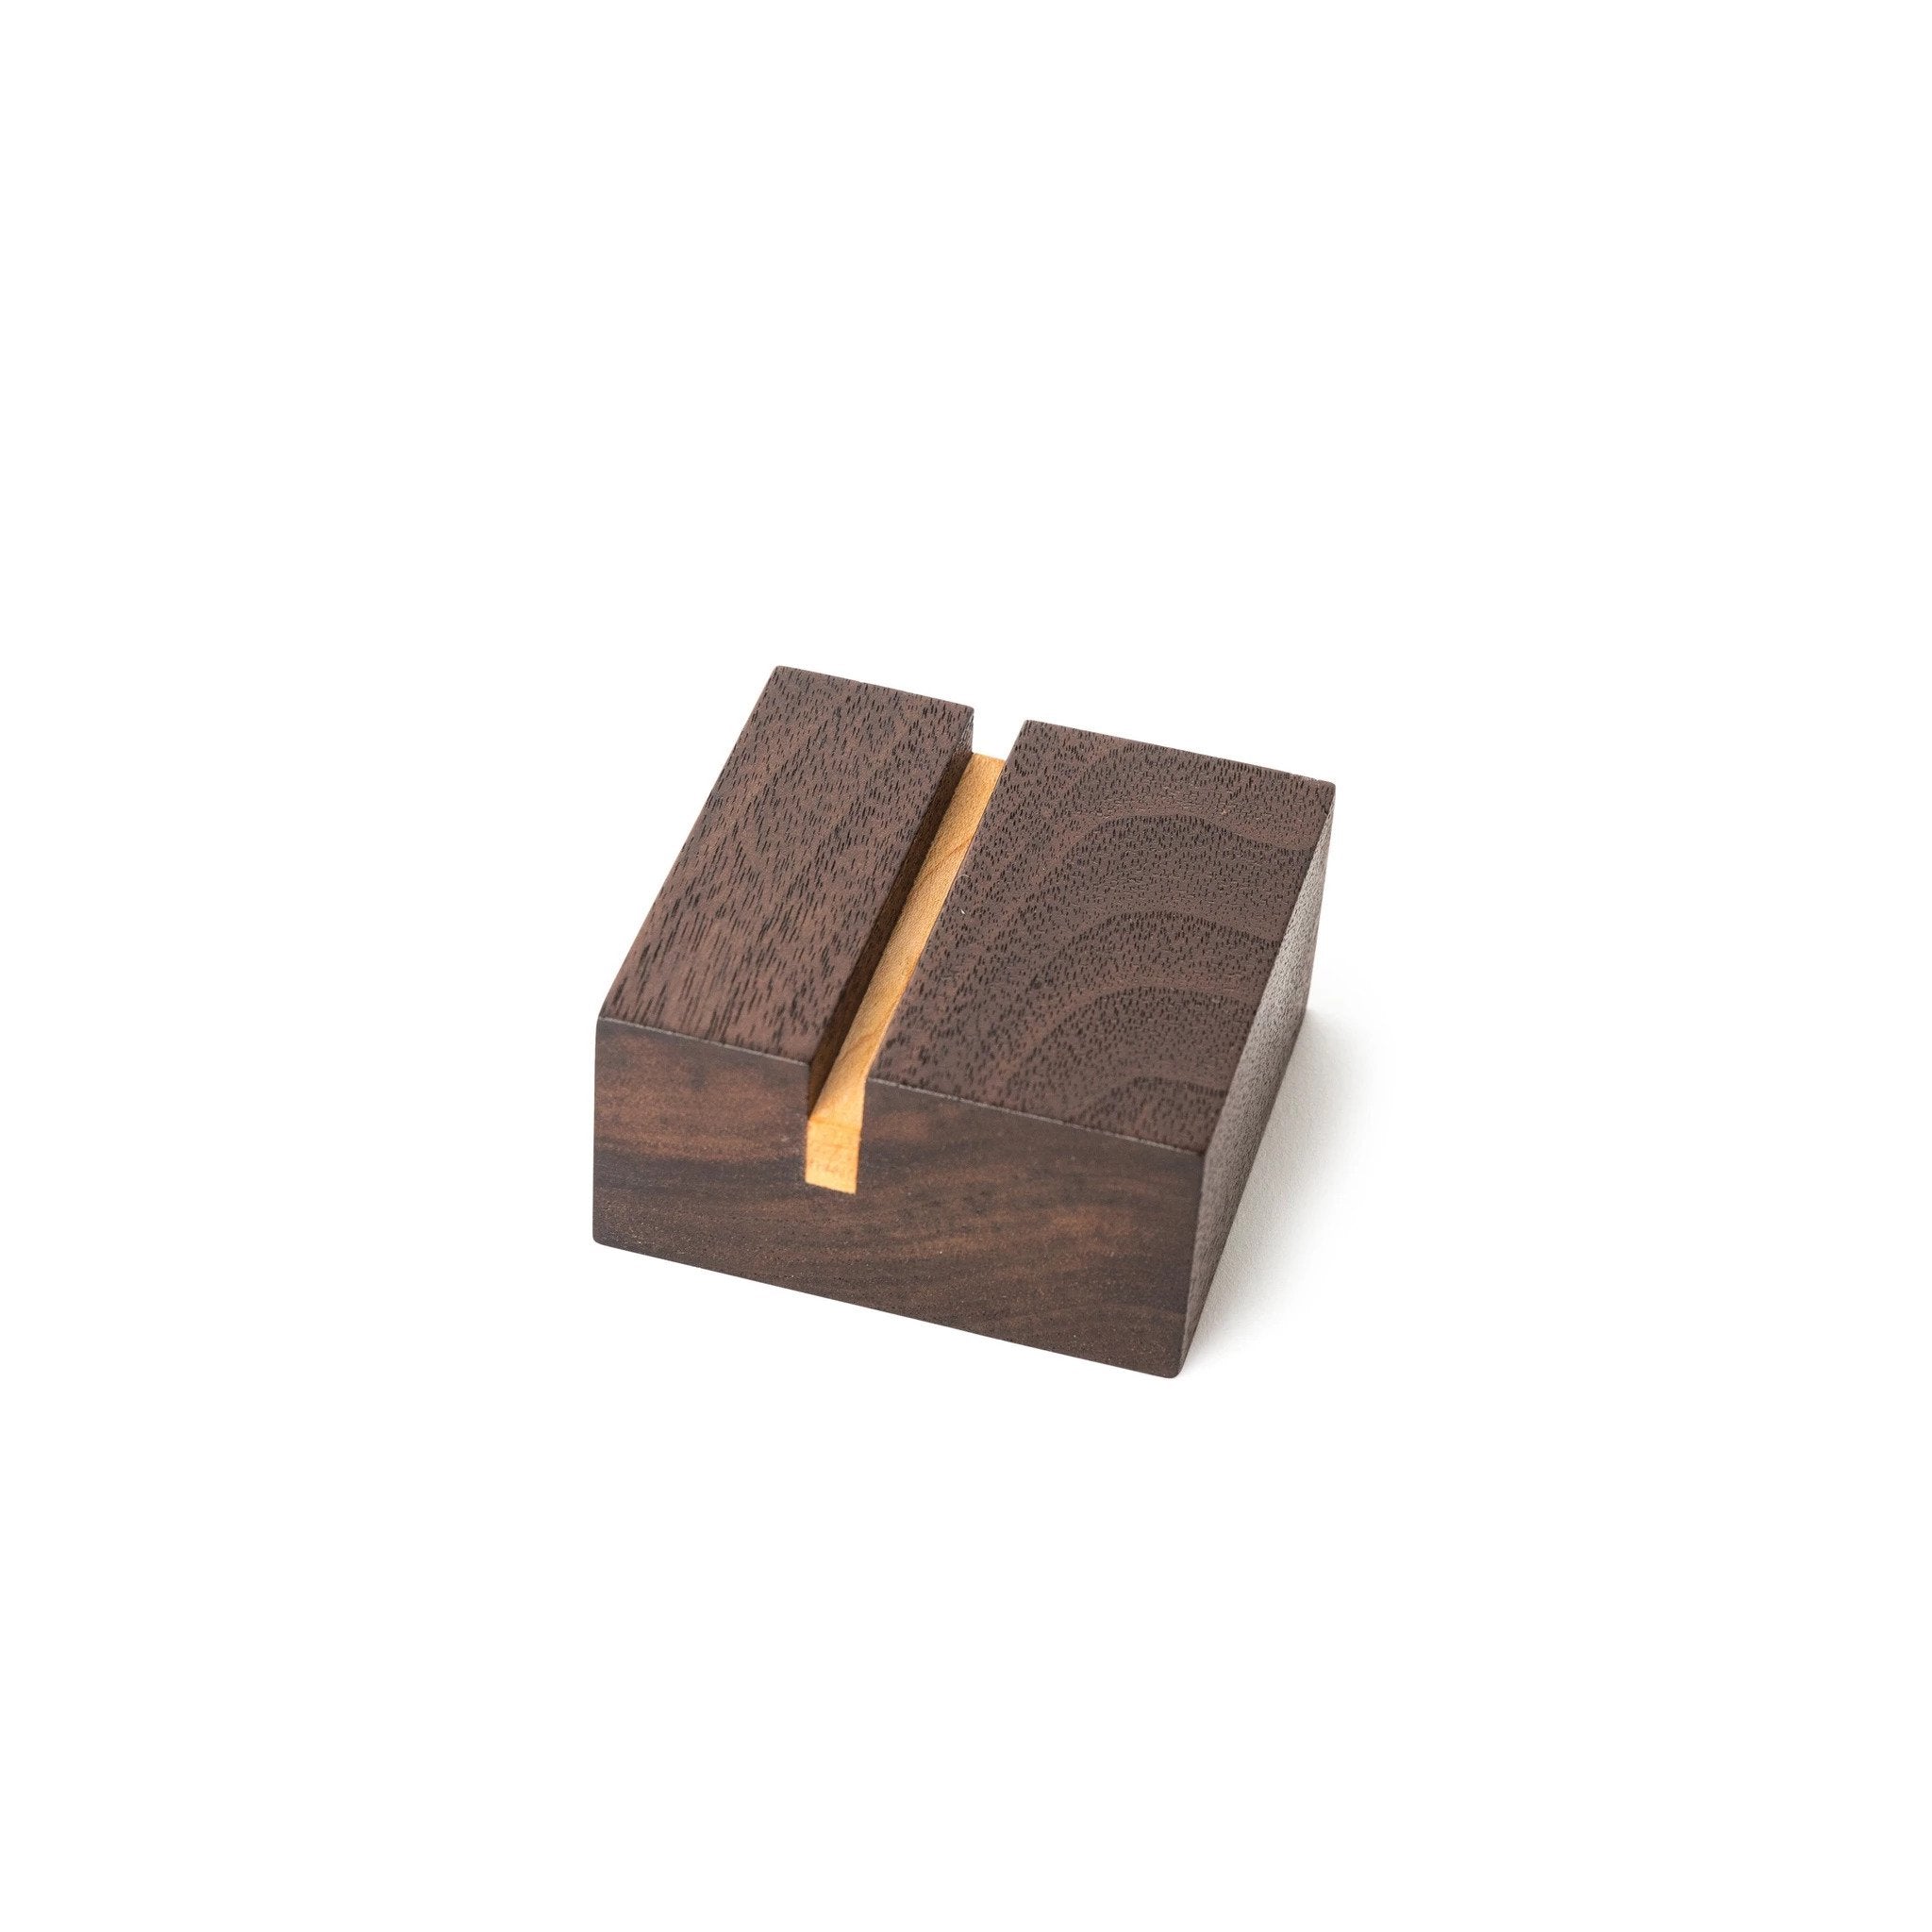 Walnut Wooden Desk Set | Design by Robyn Wood - CoCo Contemporary Connoisseur Gift Store